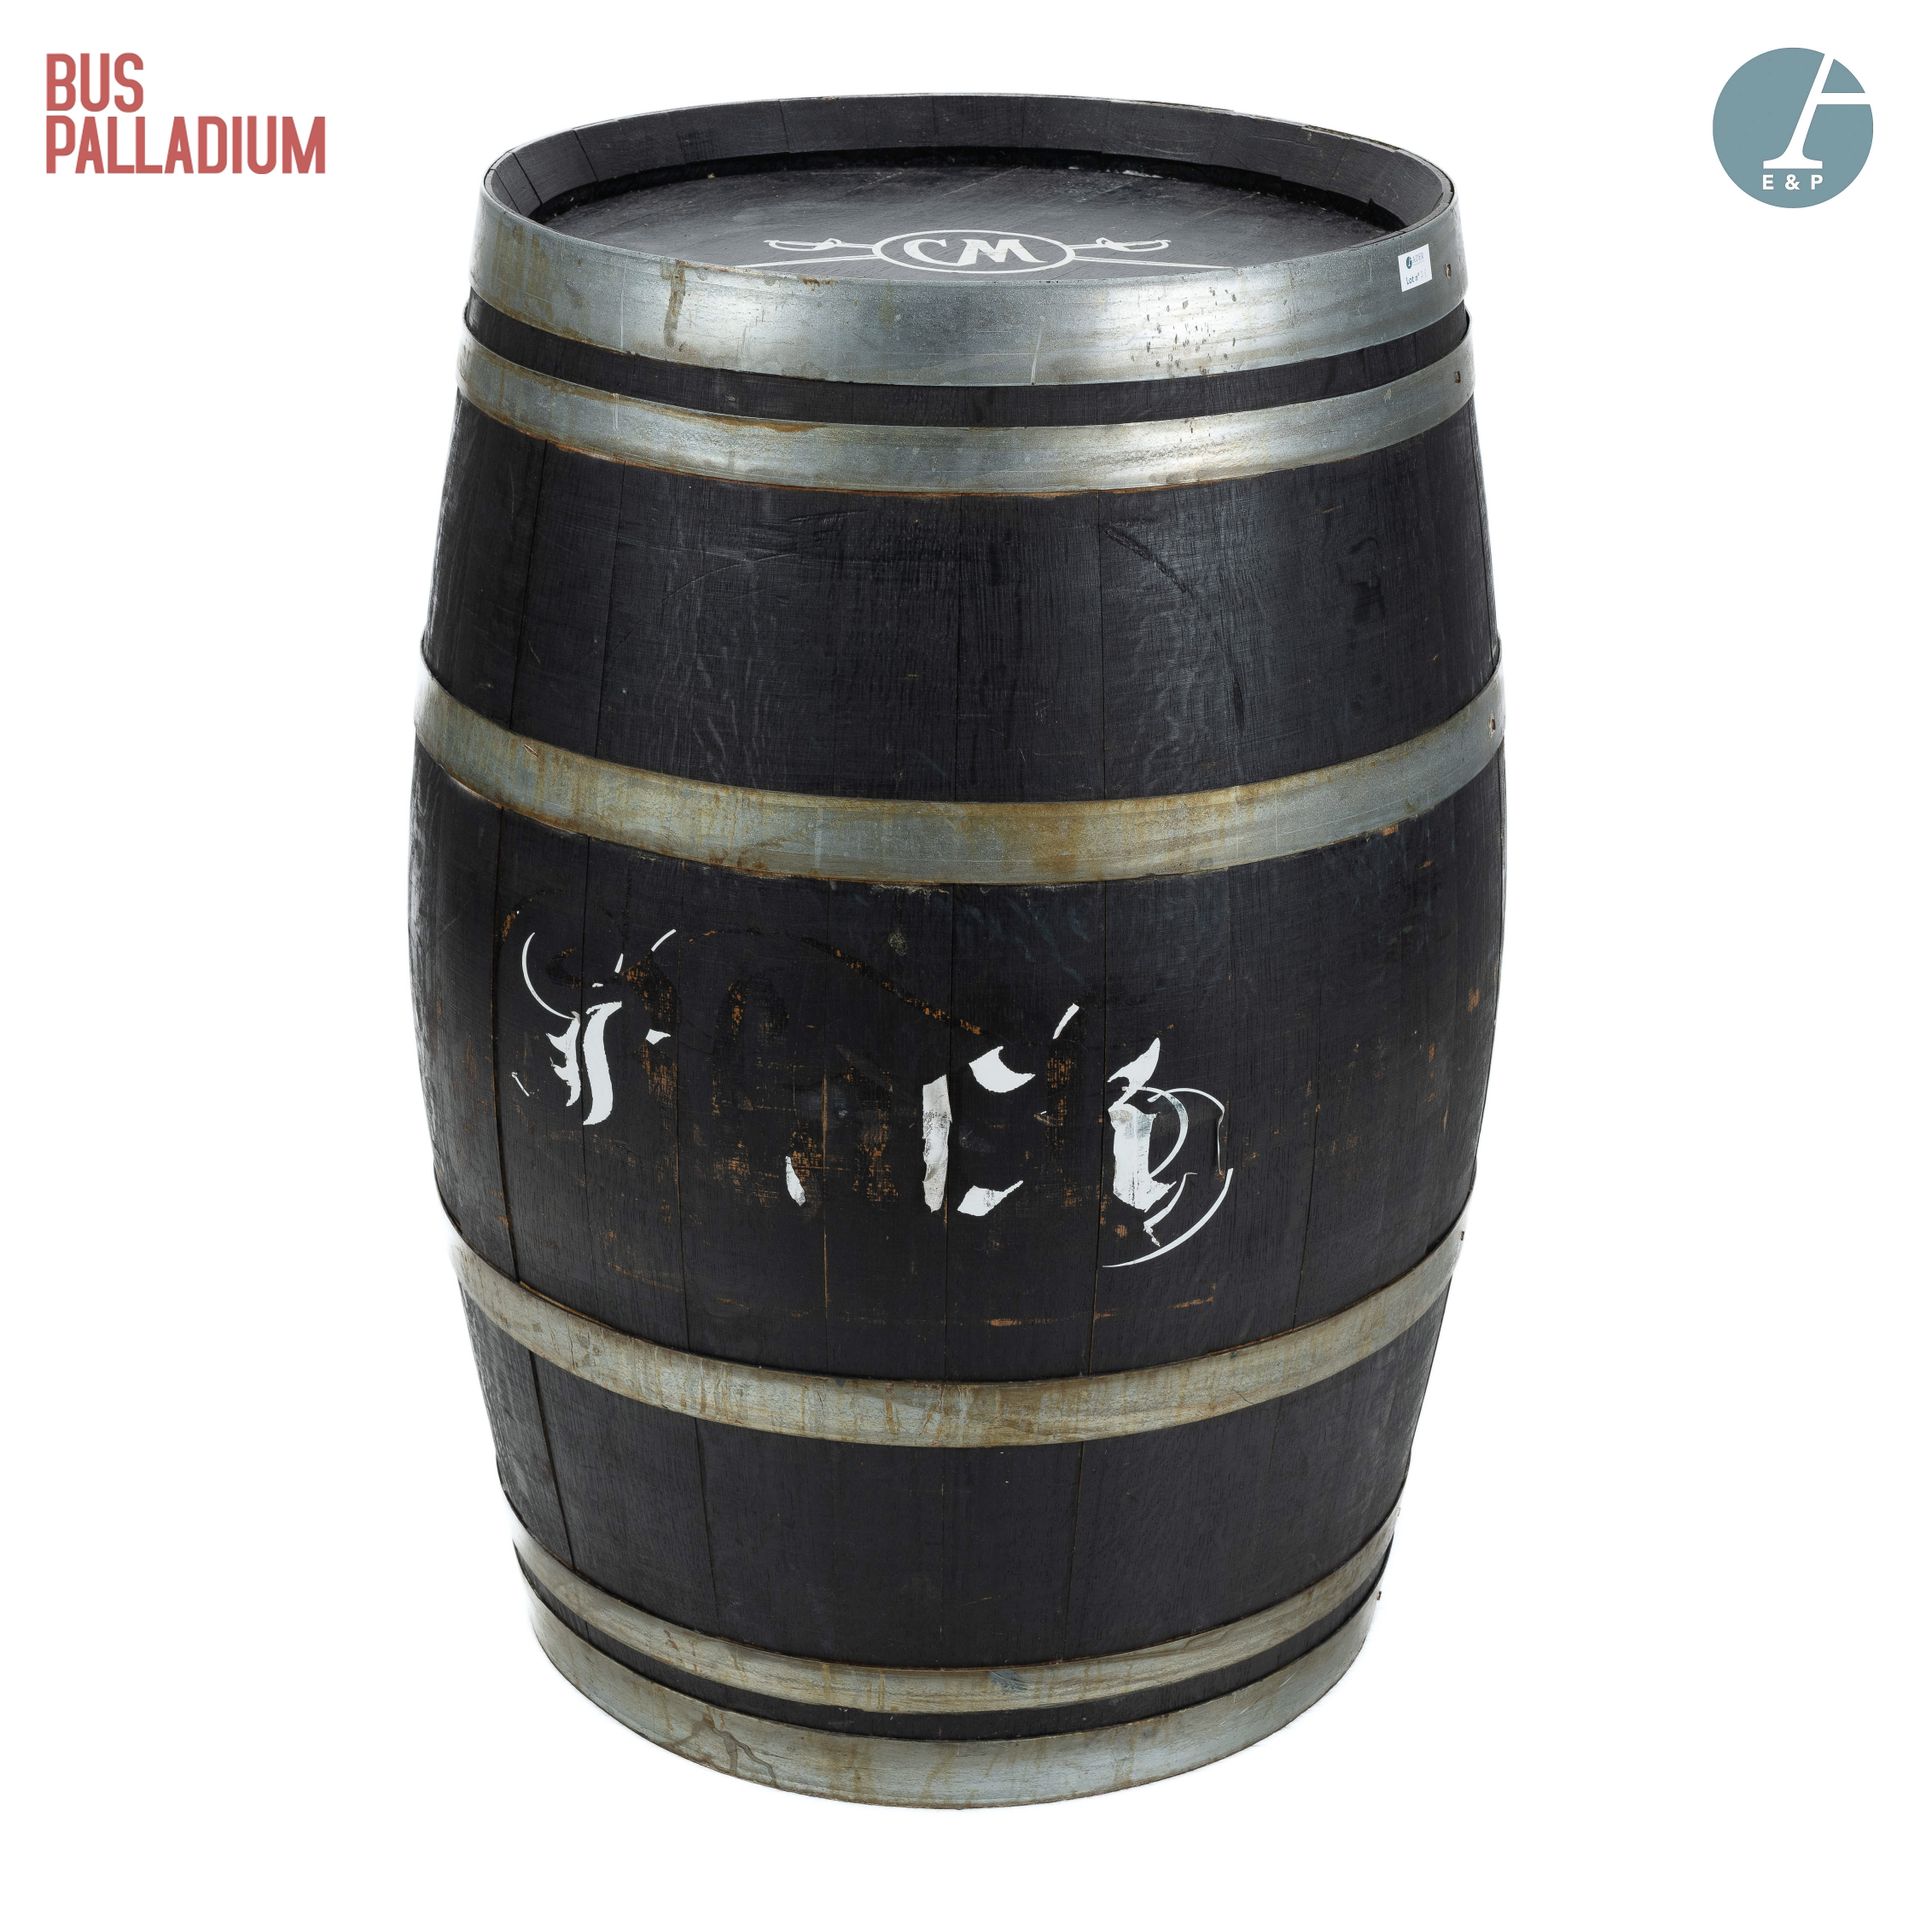 Null From the Bus Palladium concert hall



Decorative barrel in black lacquered&hellip;